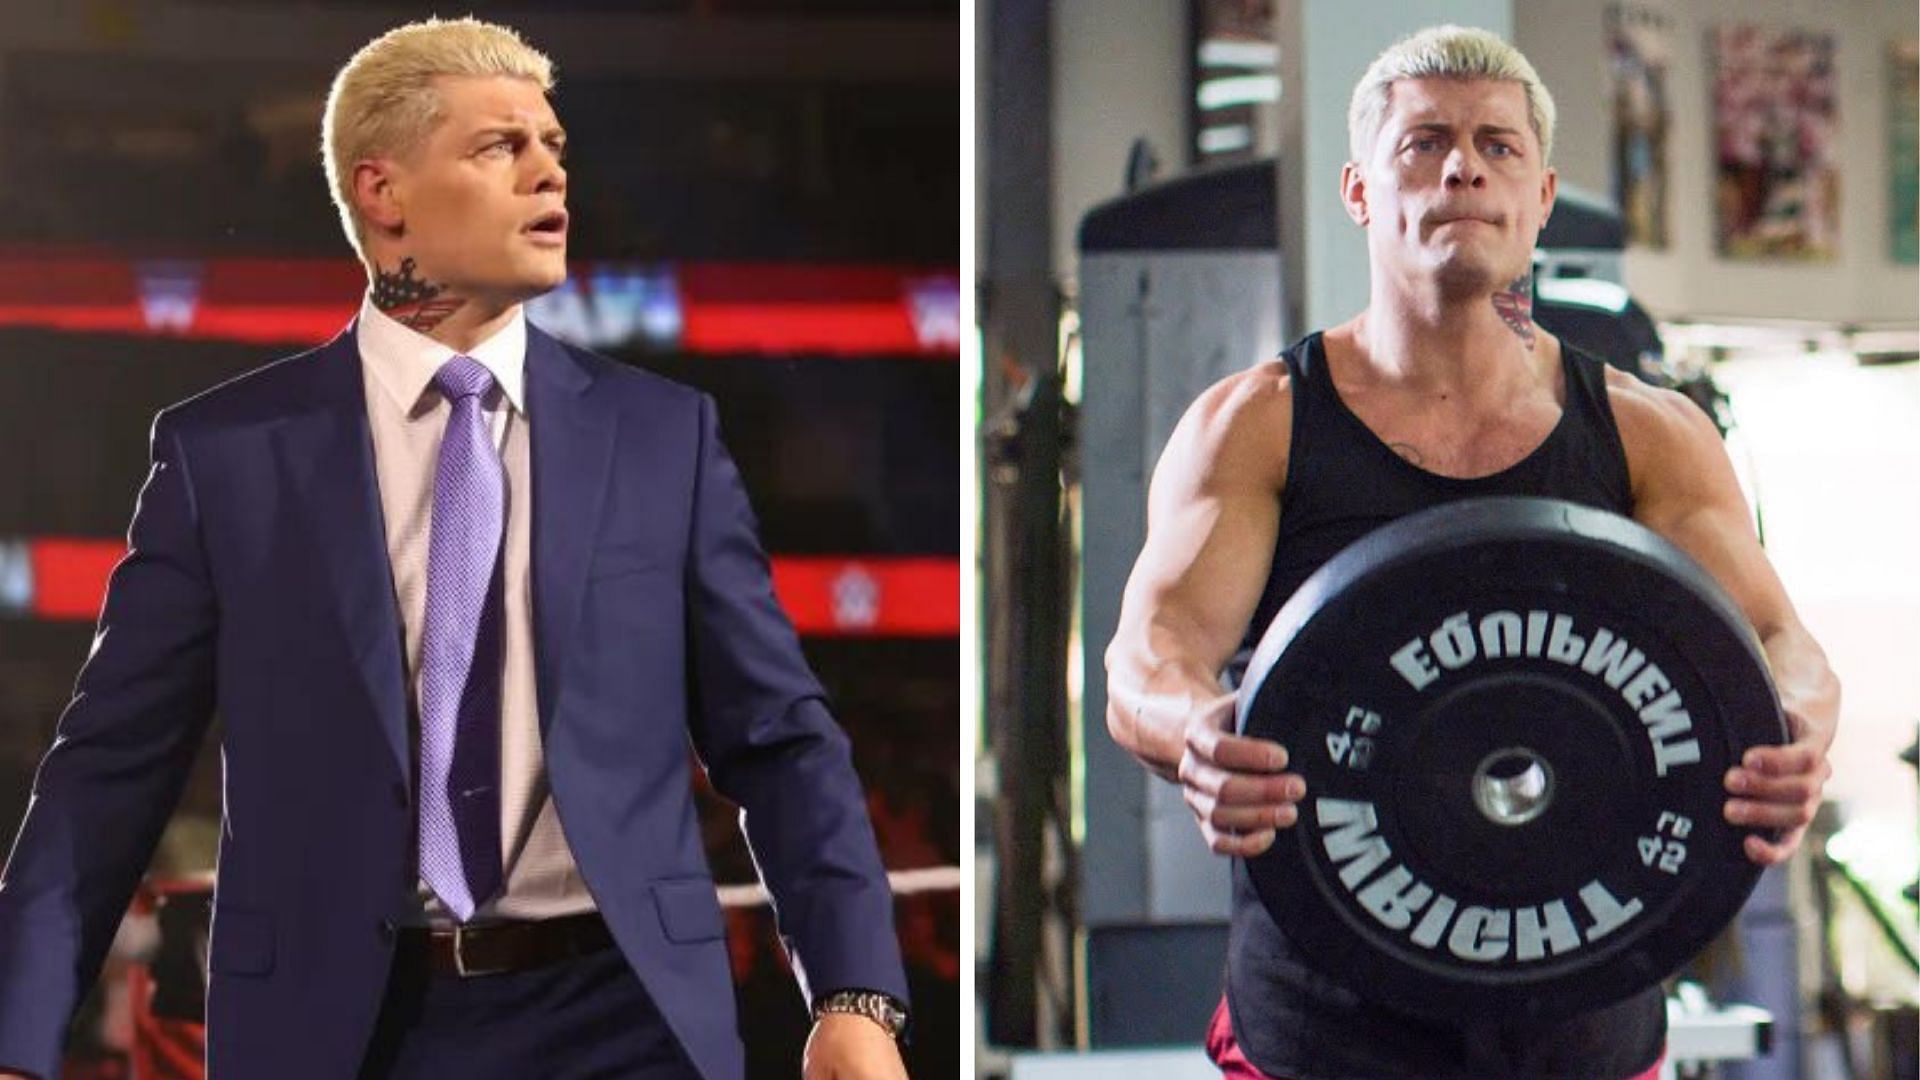 Cody Rhodes tore his pectoral muscle ahead of WWE Hell in a Cell